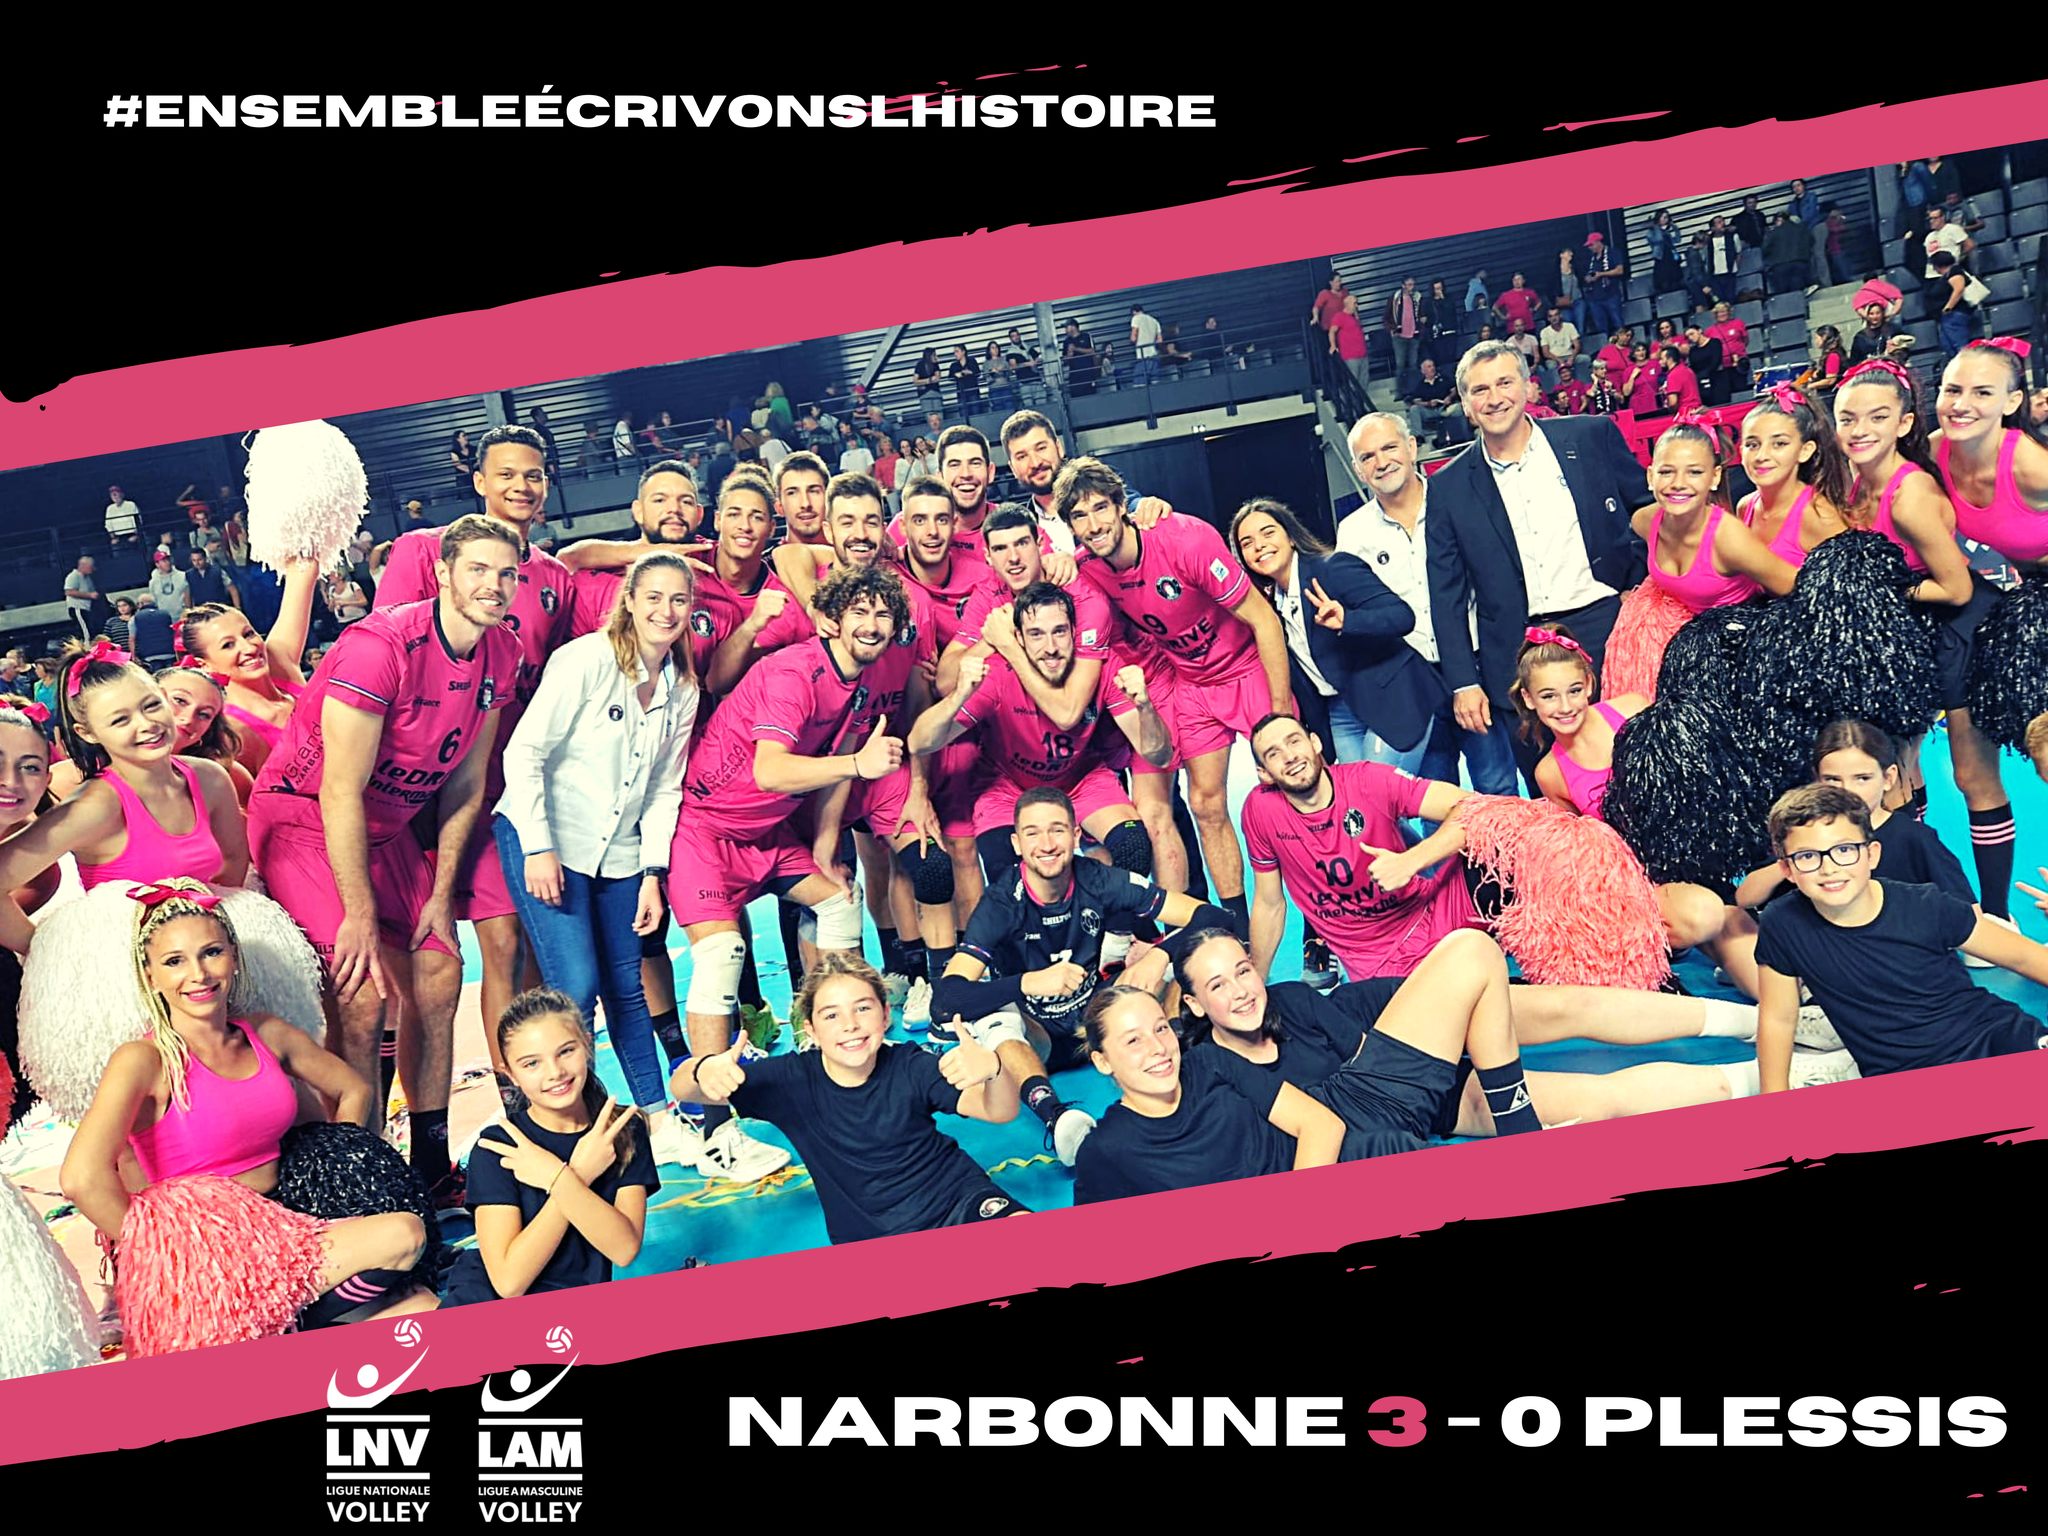 Yoan speaker pour le Narbonne Volleyball